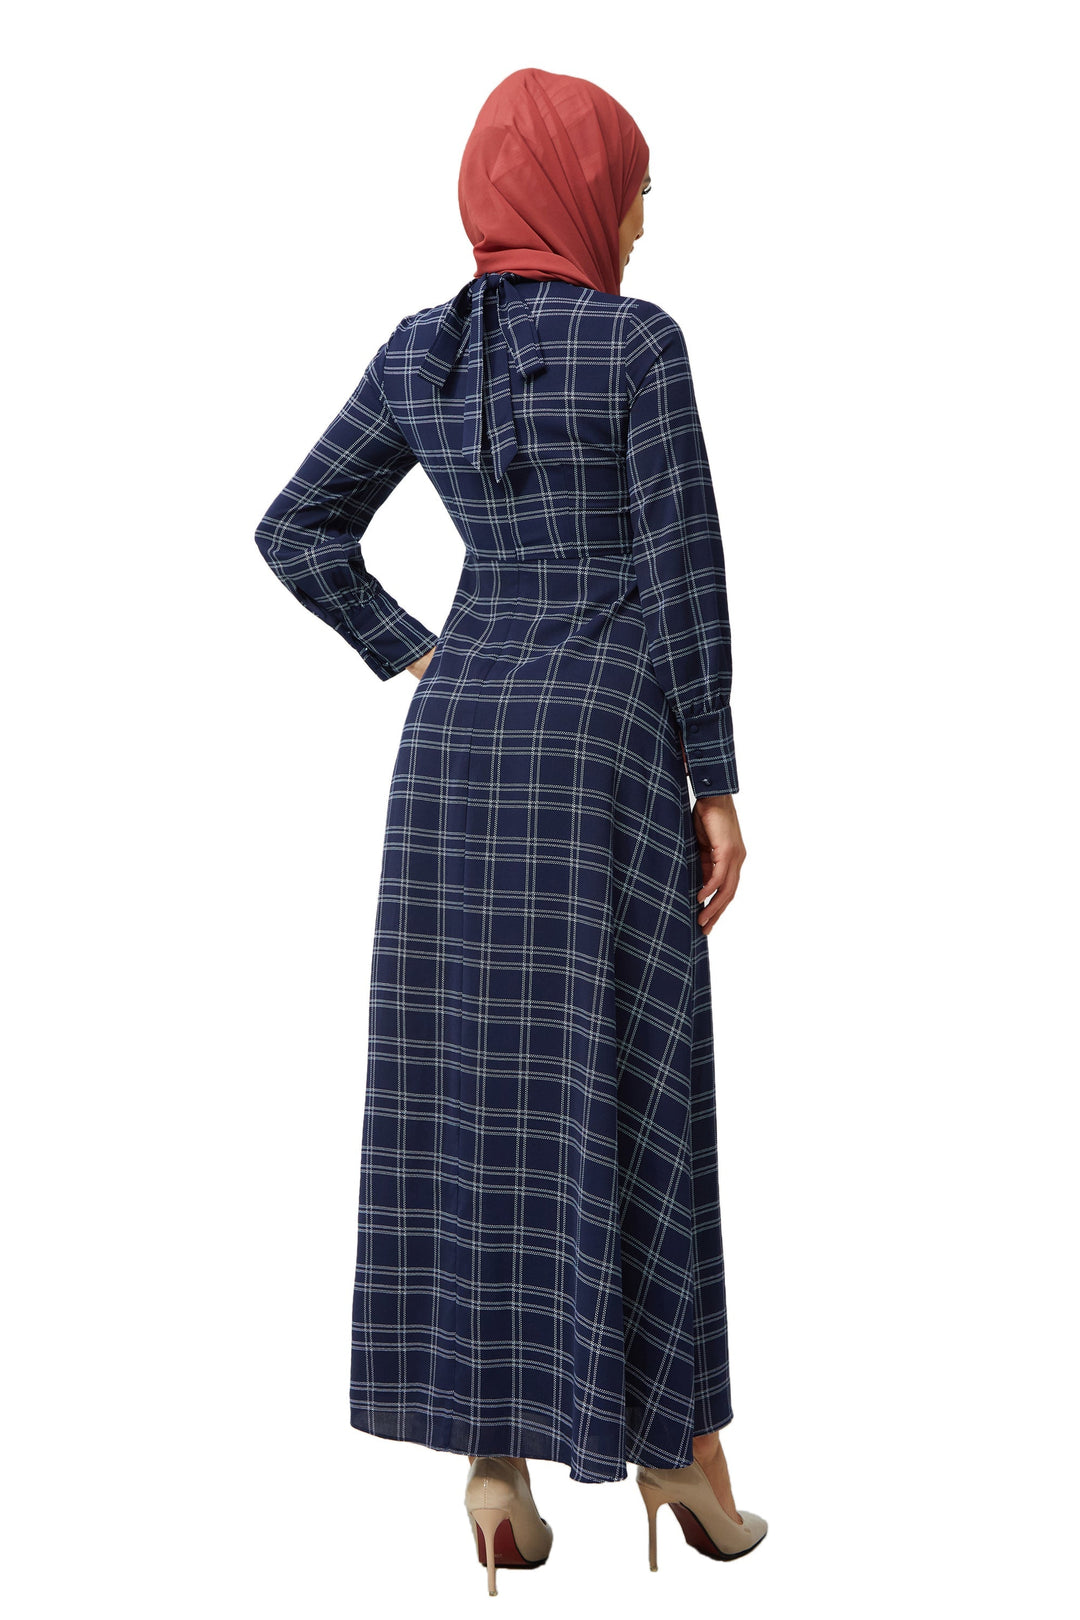 Urban Modesty - Navy and White Grid Print Maxi Dress-CLEARANCE